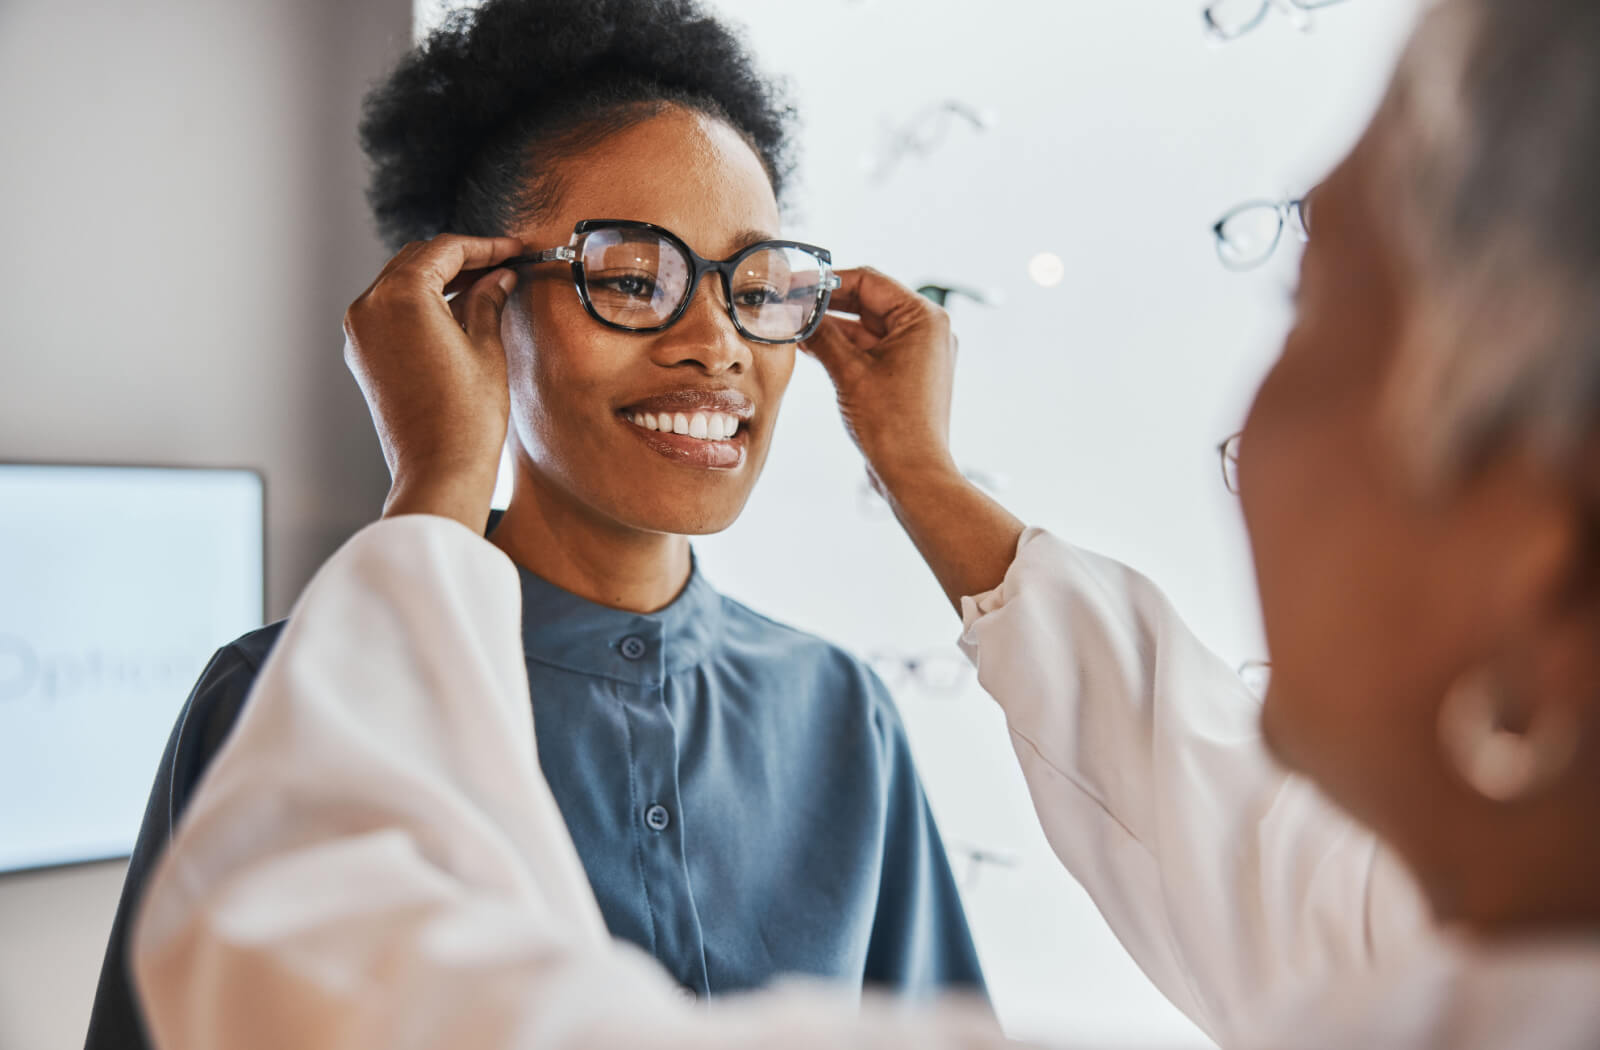 A young woman smiling and trying on glasses in a store while being assisted by an optometrist